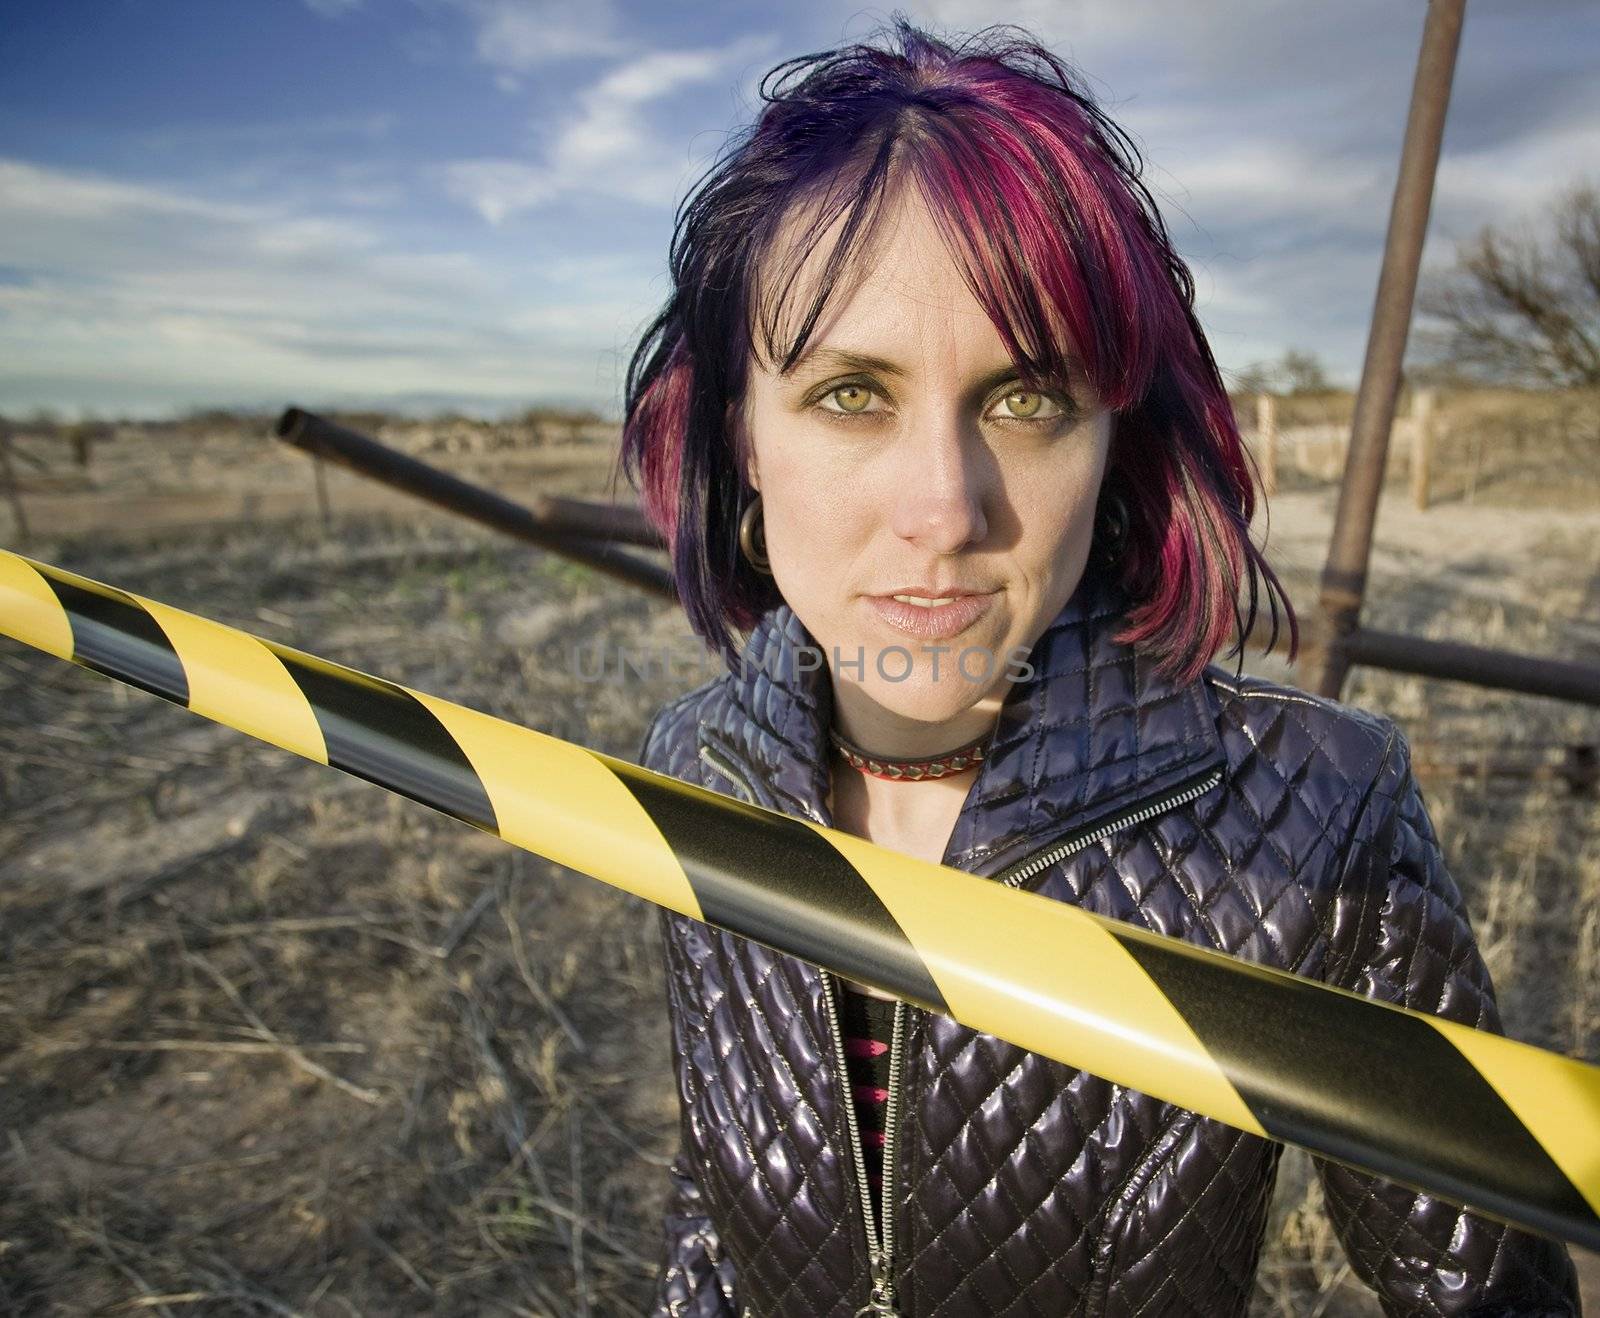 Punk Girl Behind Caution tape by Creatista